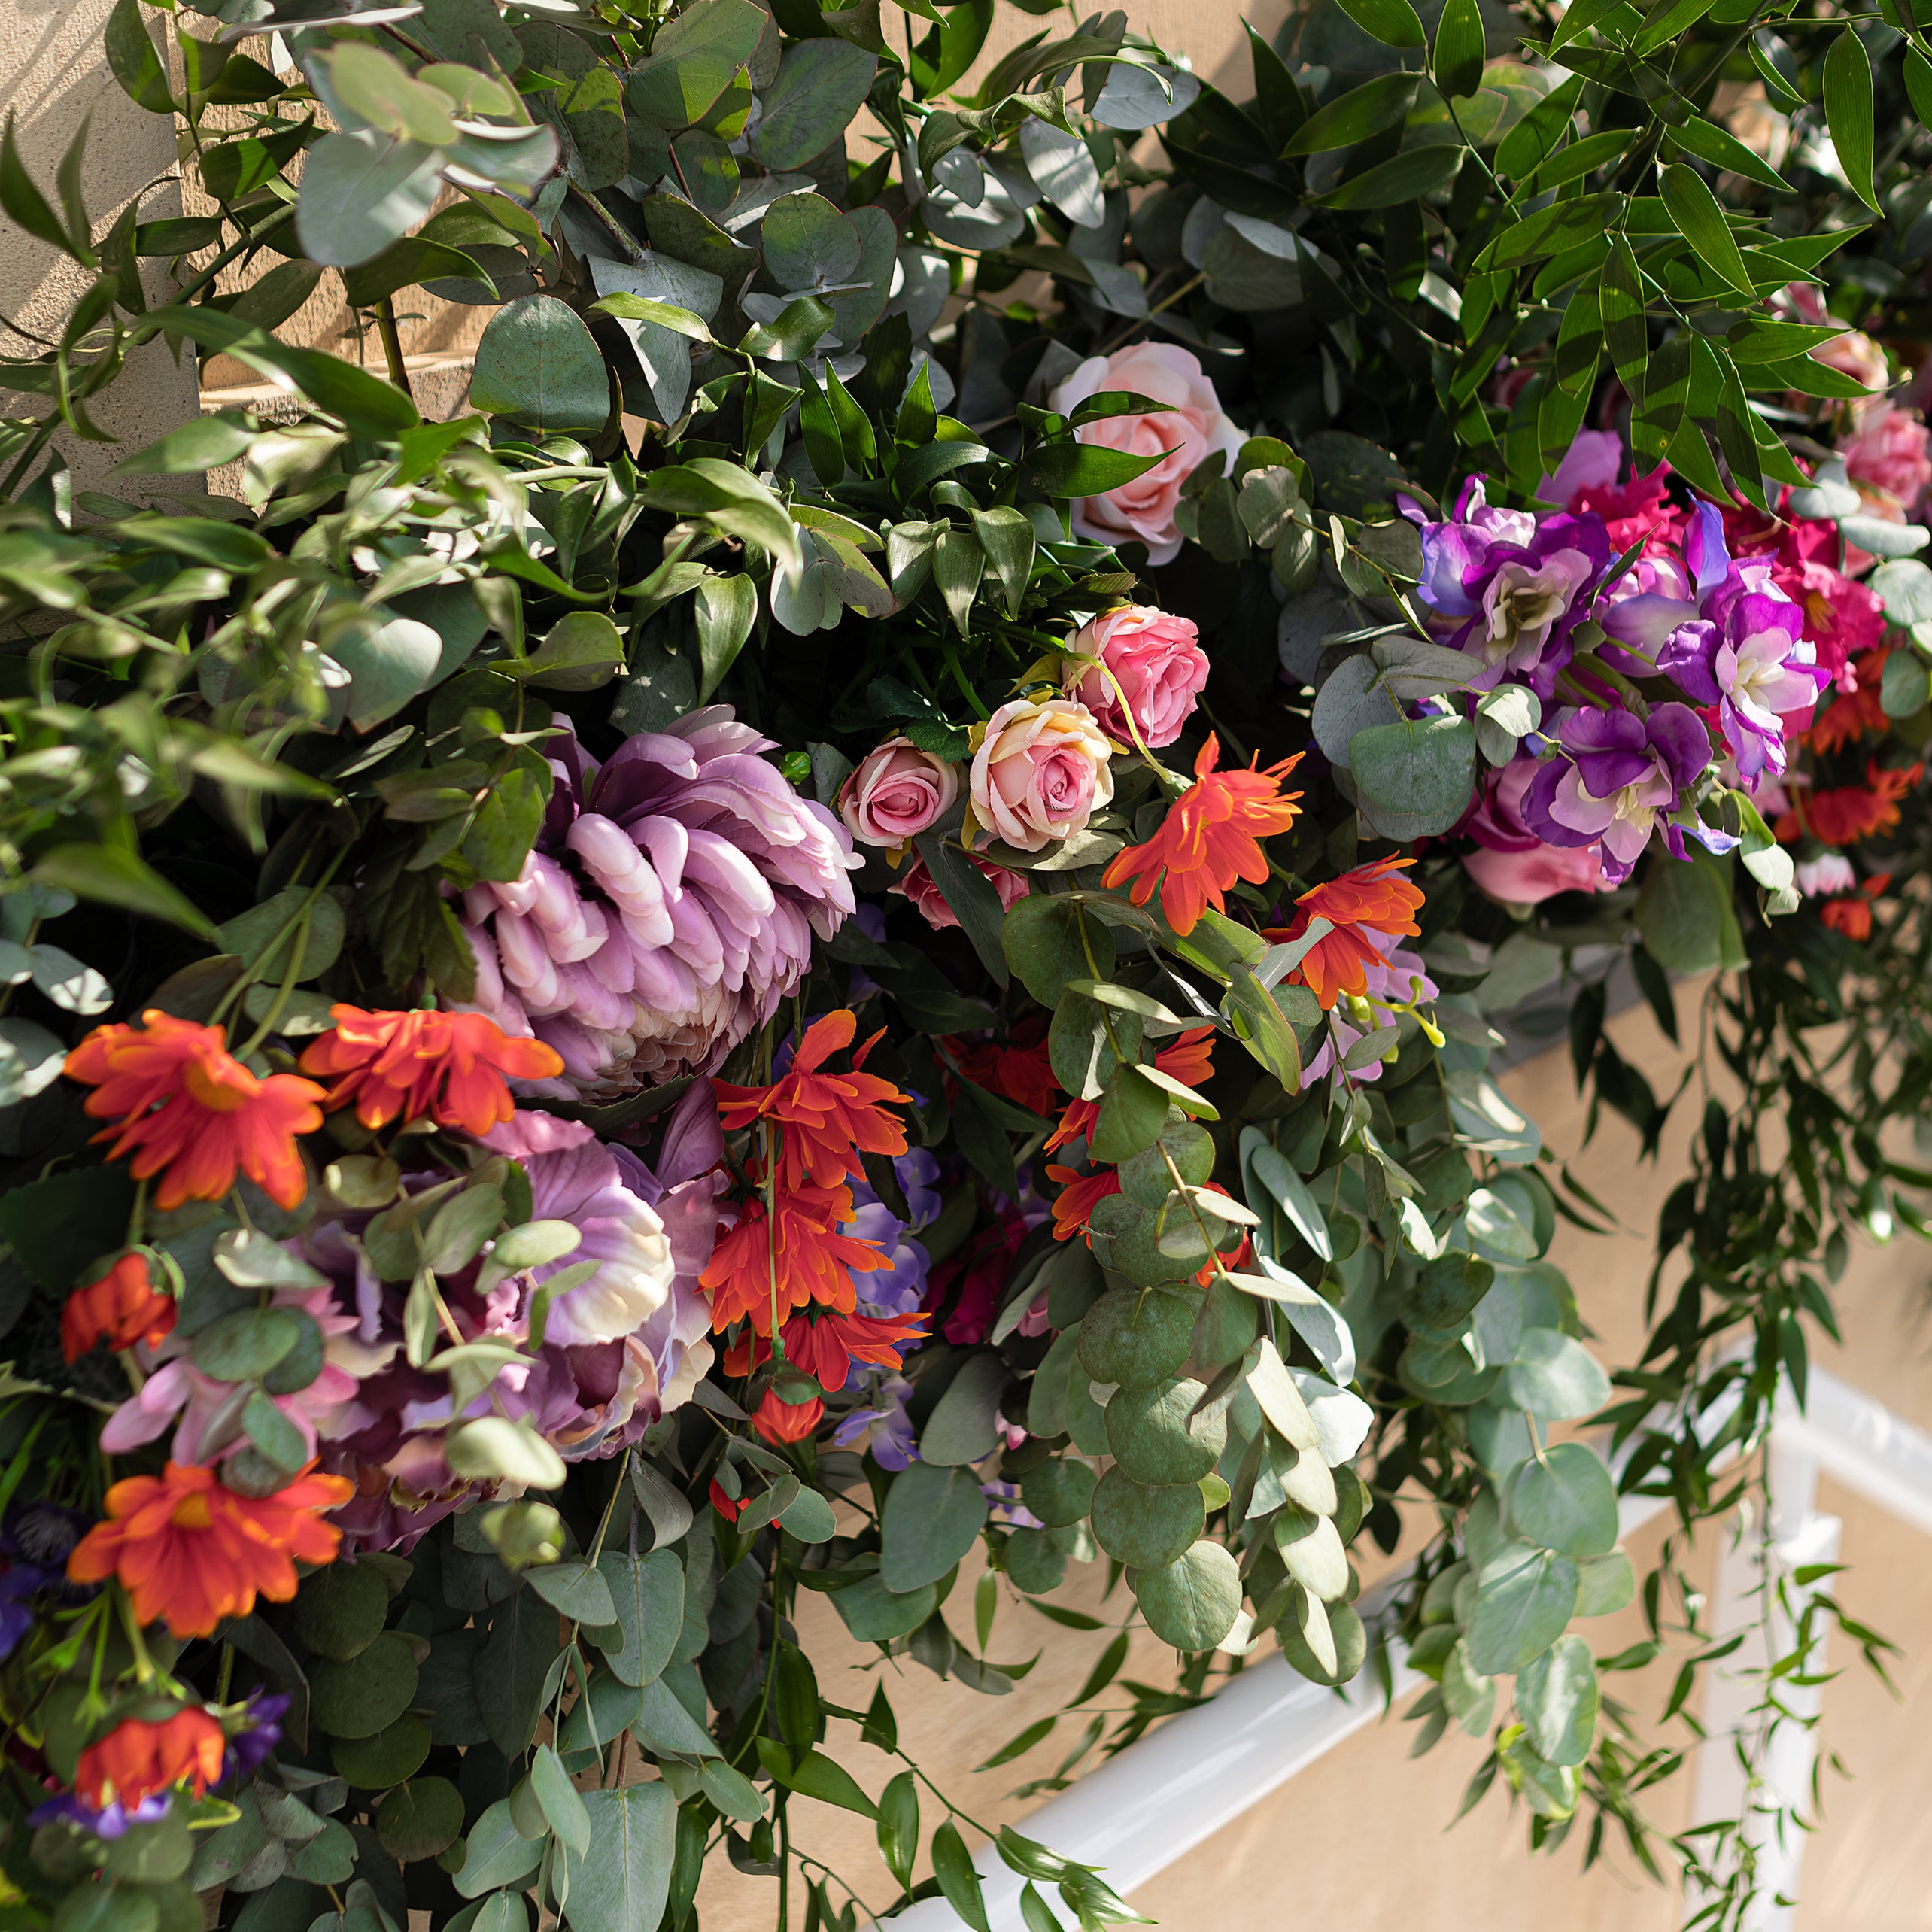 This is a close-up view of a vibrant floral arrangement designed for the Angelo Poretti stand. It features pink roses, purple hydrangeas, and orange gerberas intertwined with lush green foliage. Designed by Amaranté London, this installation at Regent’s Park for the Taste Festival event showcases our expertise in creating stunning floral decor for events.